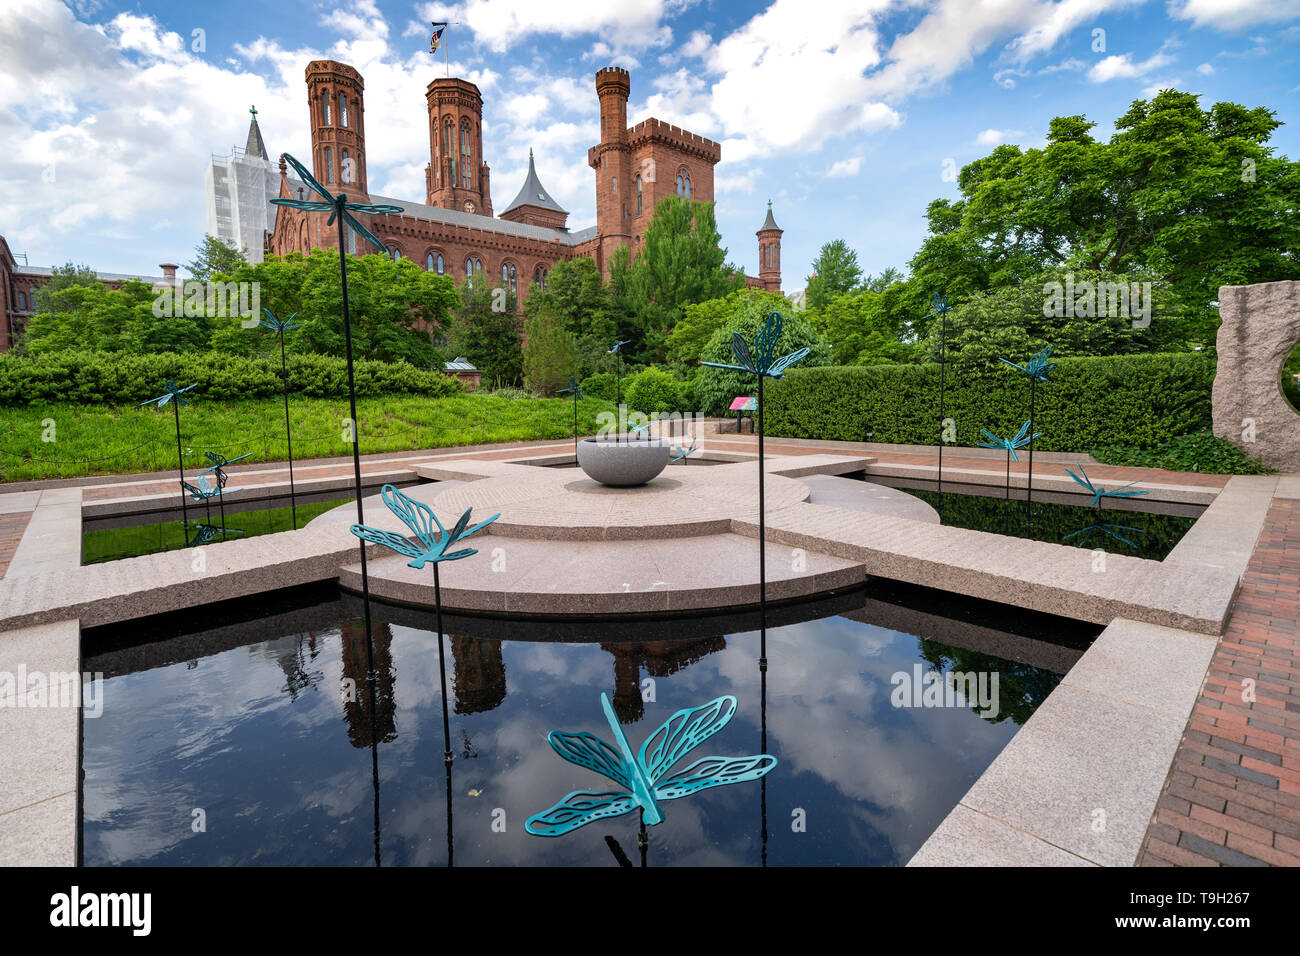 Washington, DC - May 9, 2019: The Moongate Garden with dragonfly statues in the Enid Haupt Garden and the Smithsonian Castle on the National Mall Stock Photo